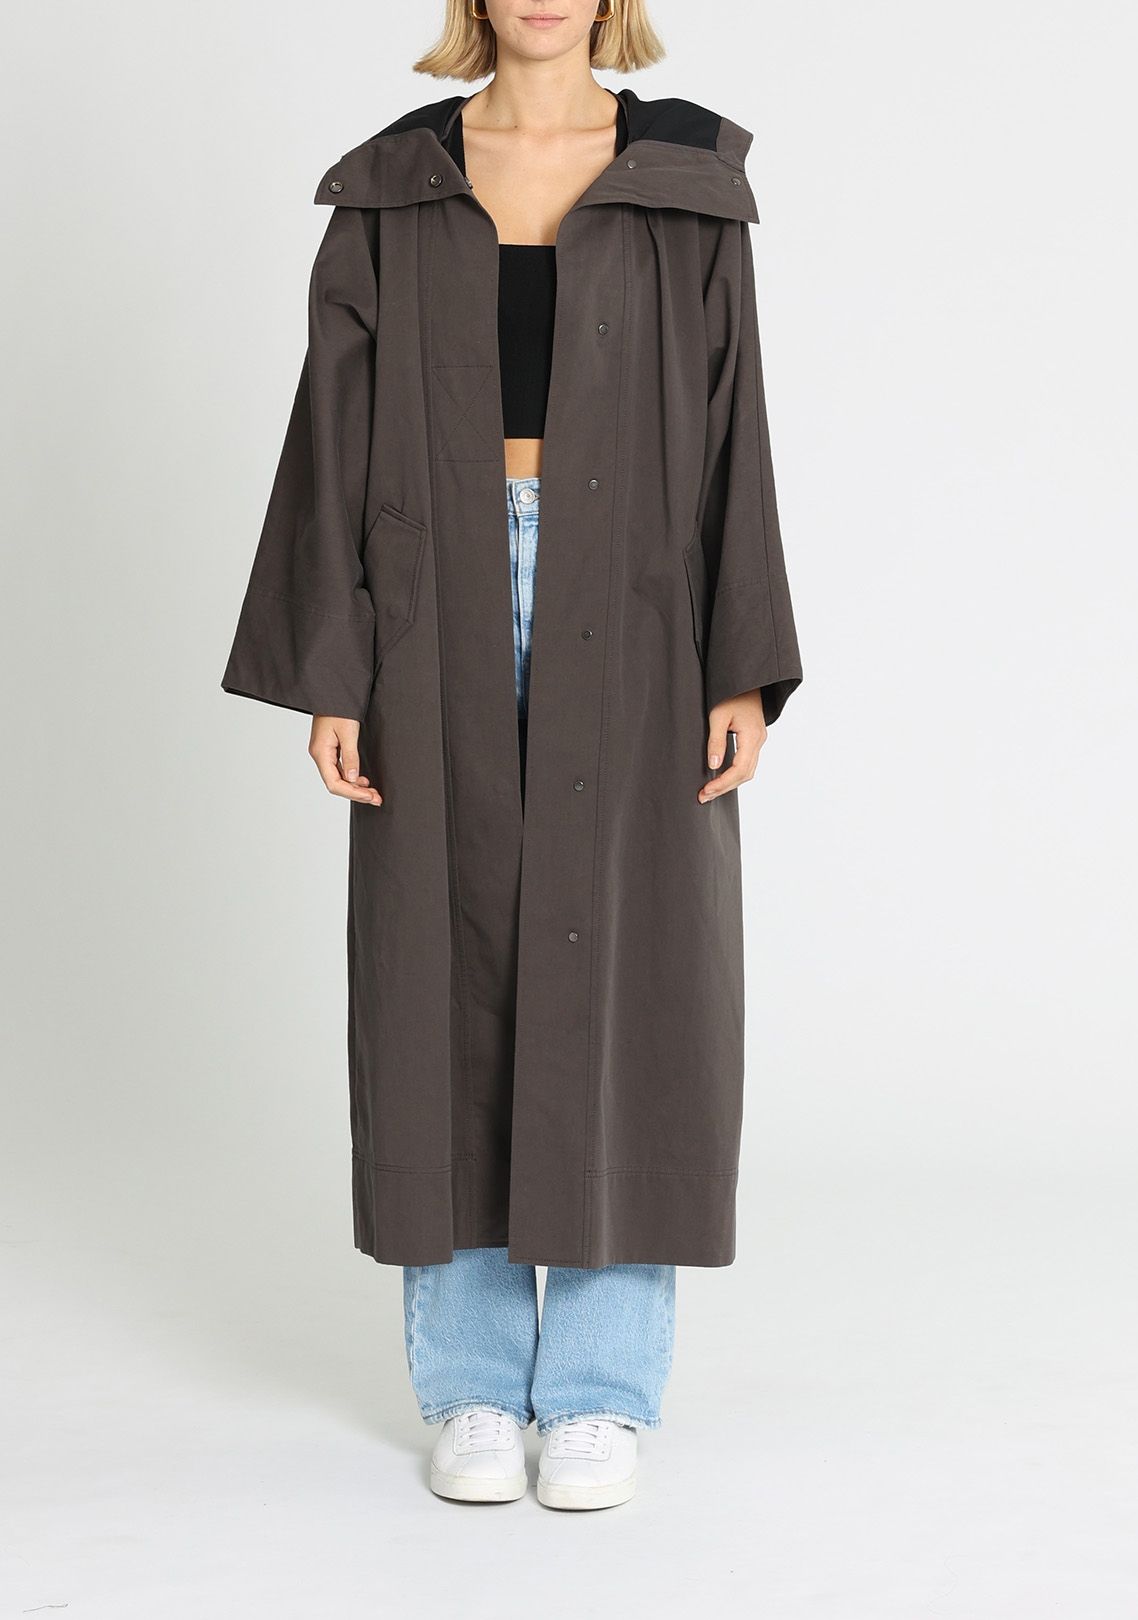 CAMILLA AND MARC - Dunne Hooded Coat - Coal